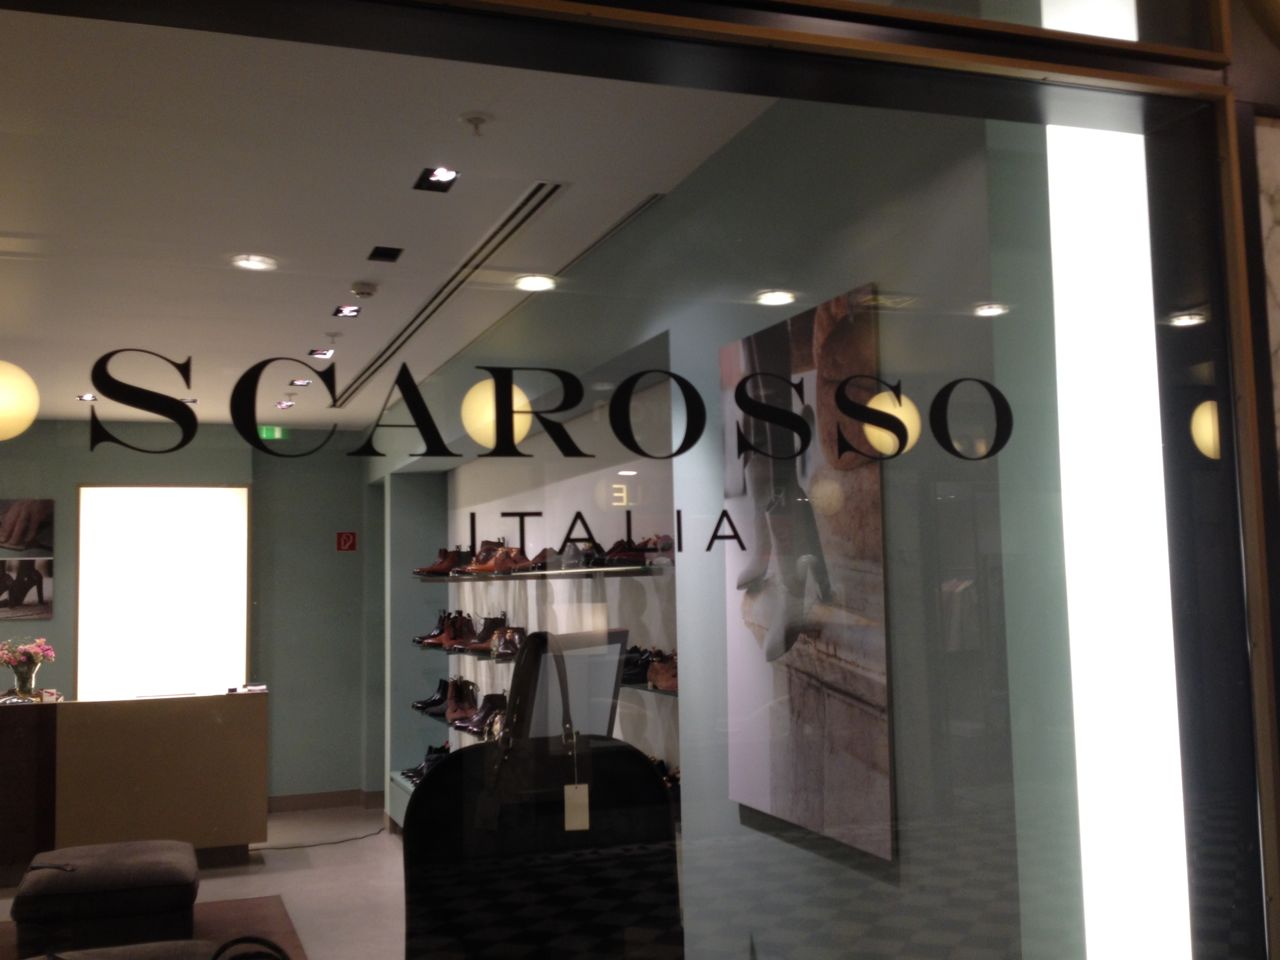 “Scarosso”Classic Shoes for the classic hipster! – BerlinSixSenses